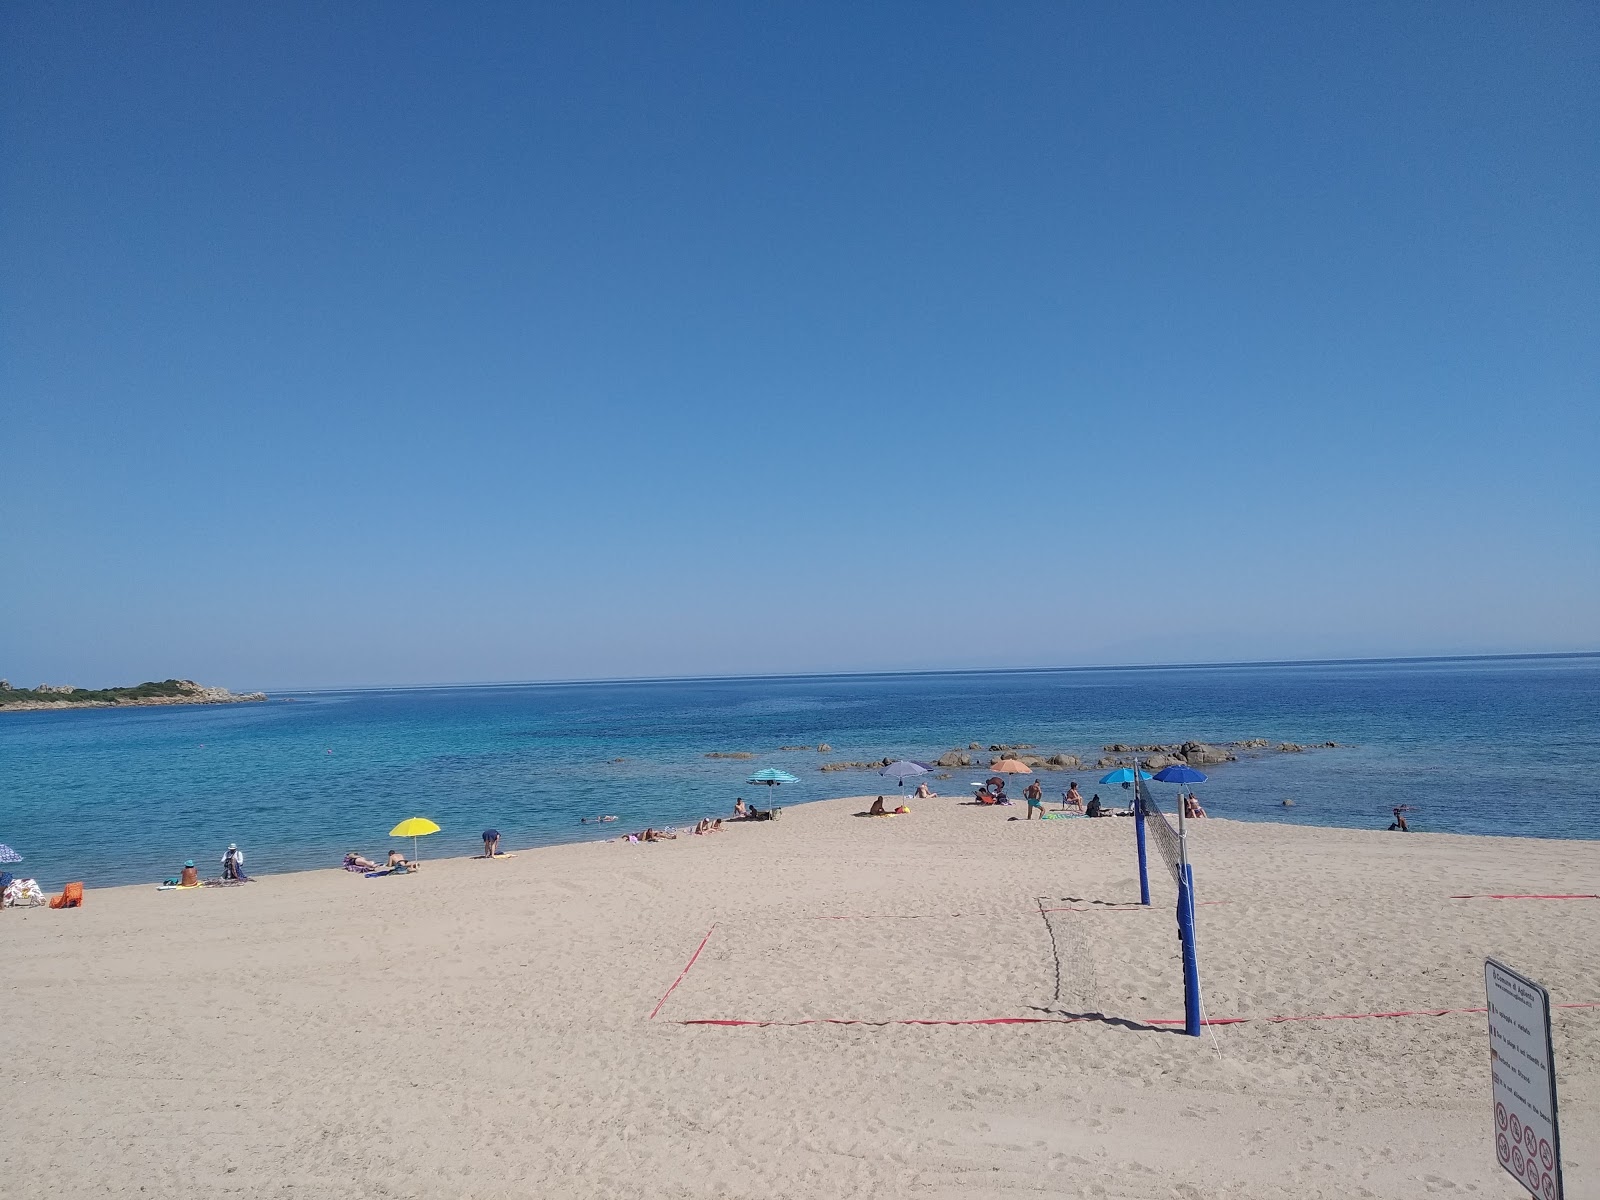 Photo of Spiaggia di Vignola - popular place among relax connoisseurs